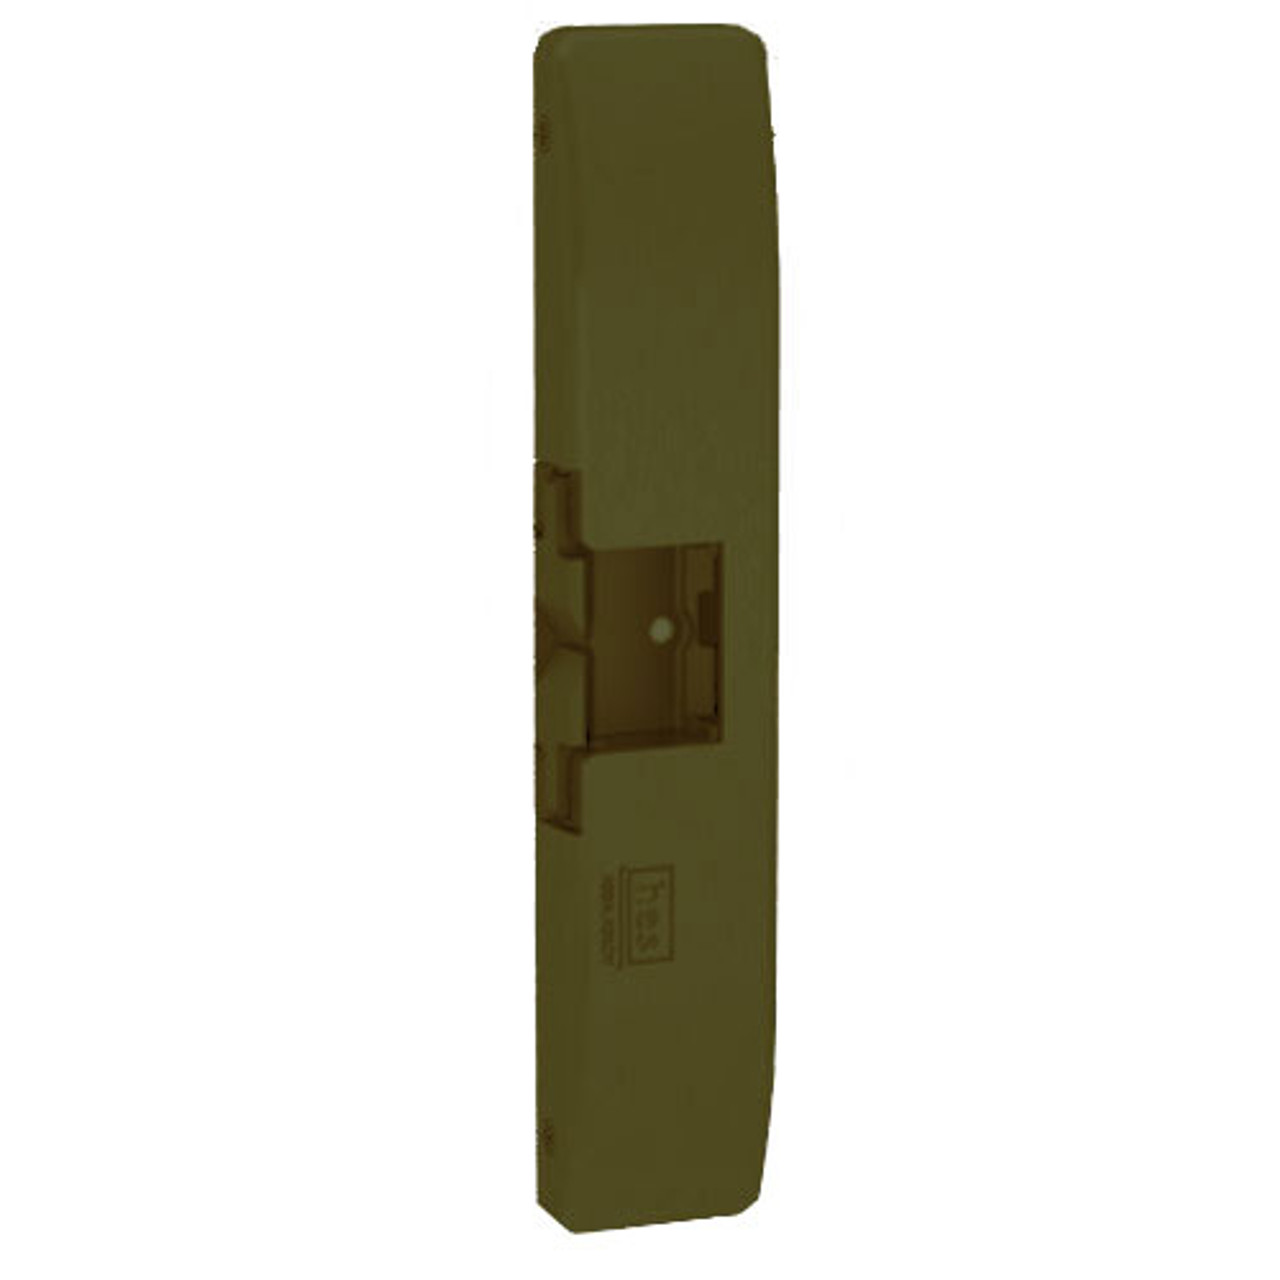 9500-613 Hes Electric Strike Fire Rated in Bronze Toned finish